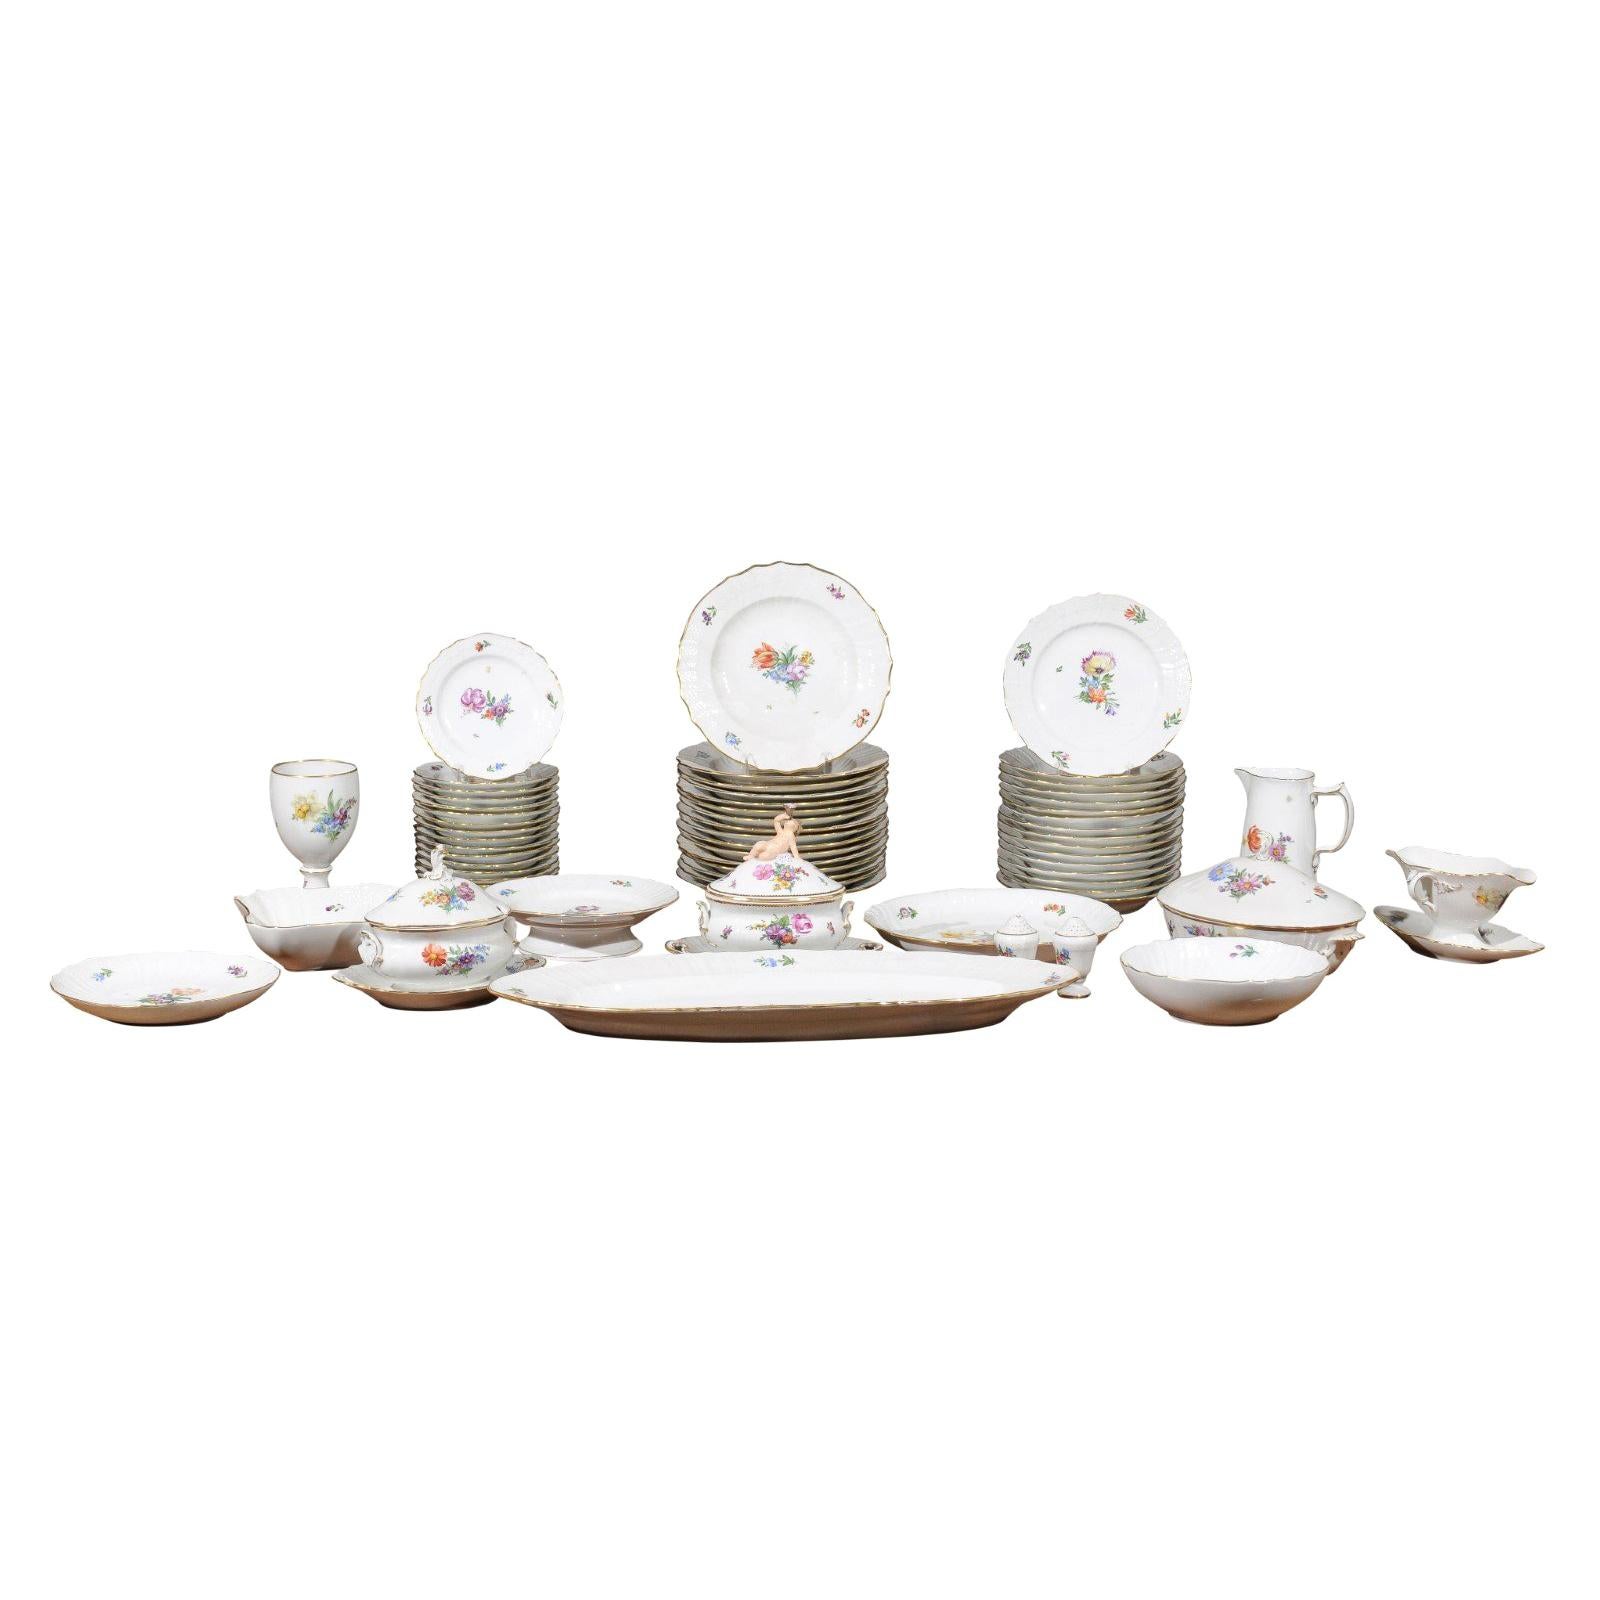 Stamped Royal Copenhagen China Set with Hand Painted Floral Décor and Gilt Trim